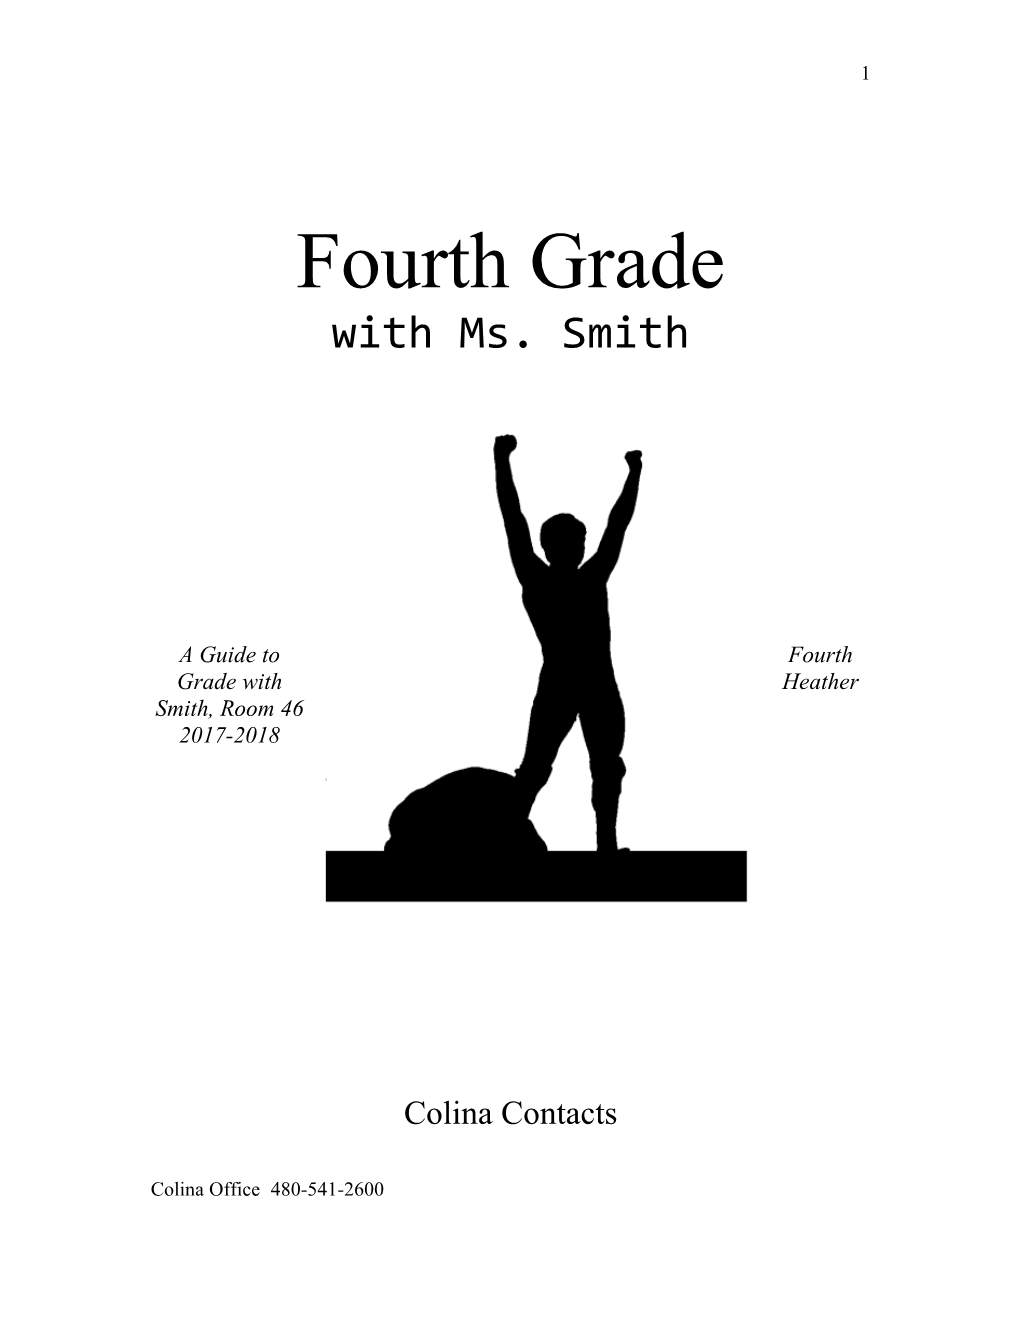 A Guide to Fourth Grade with Heather Smith, Room 46